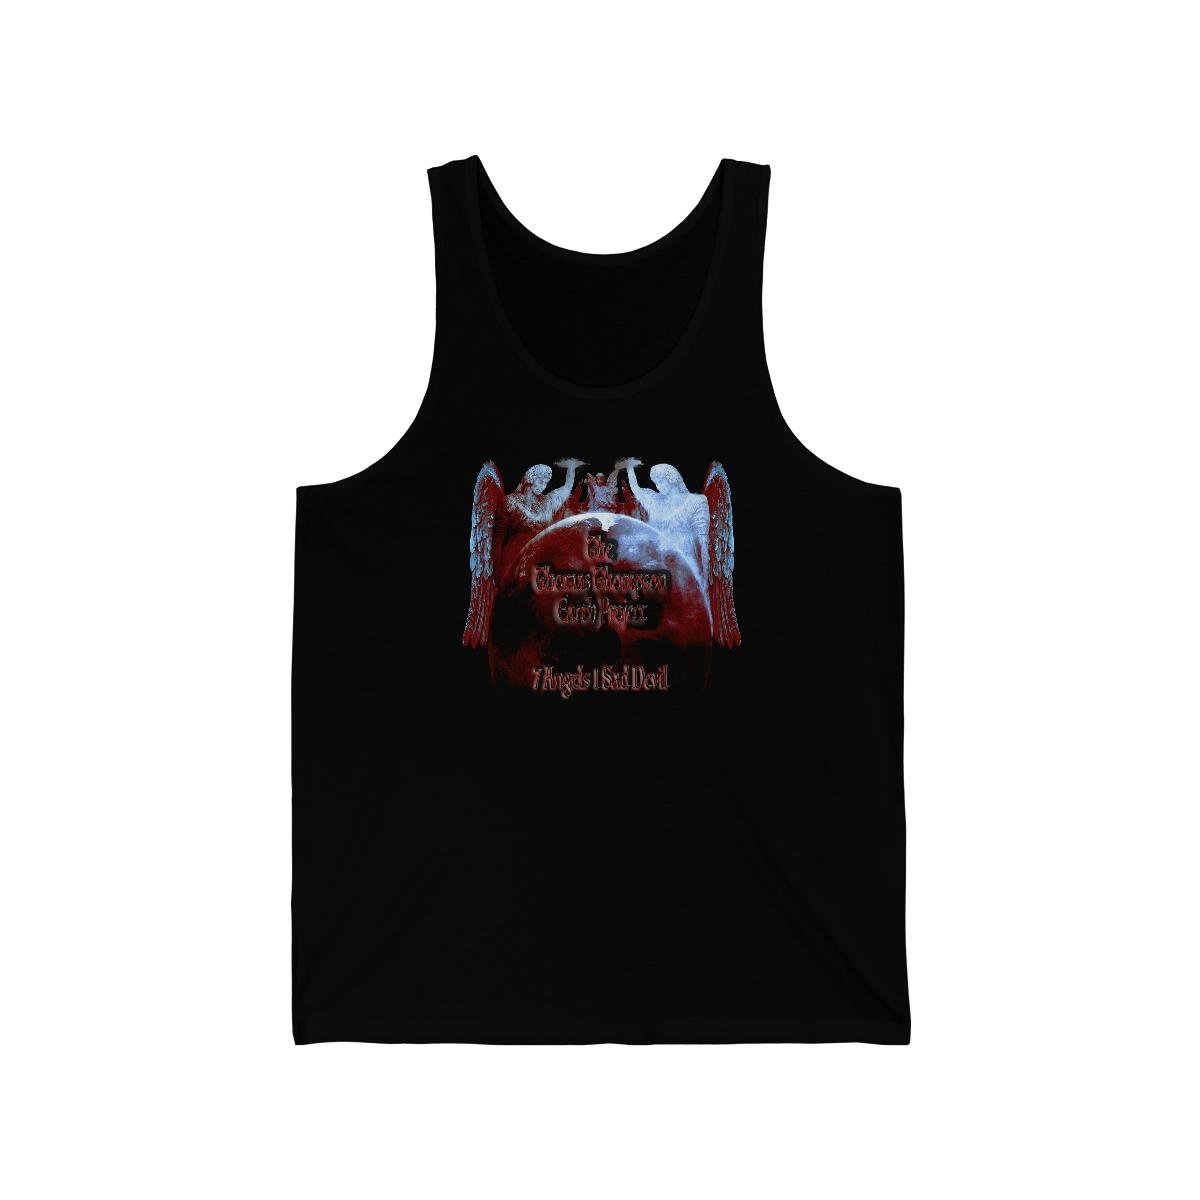 The Thomas Thompson Earth Project 7 Angels Unisex Jersey Tank